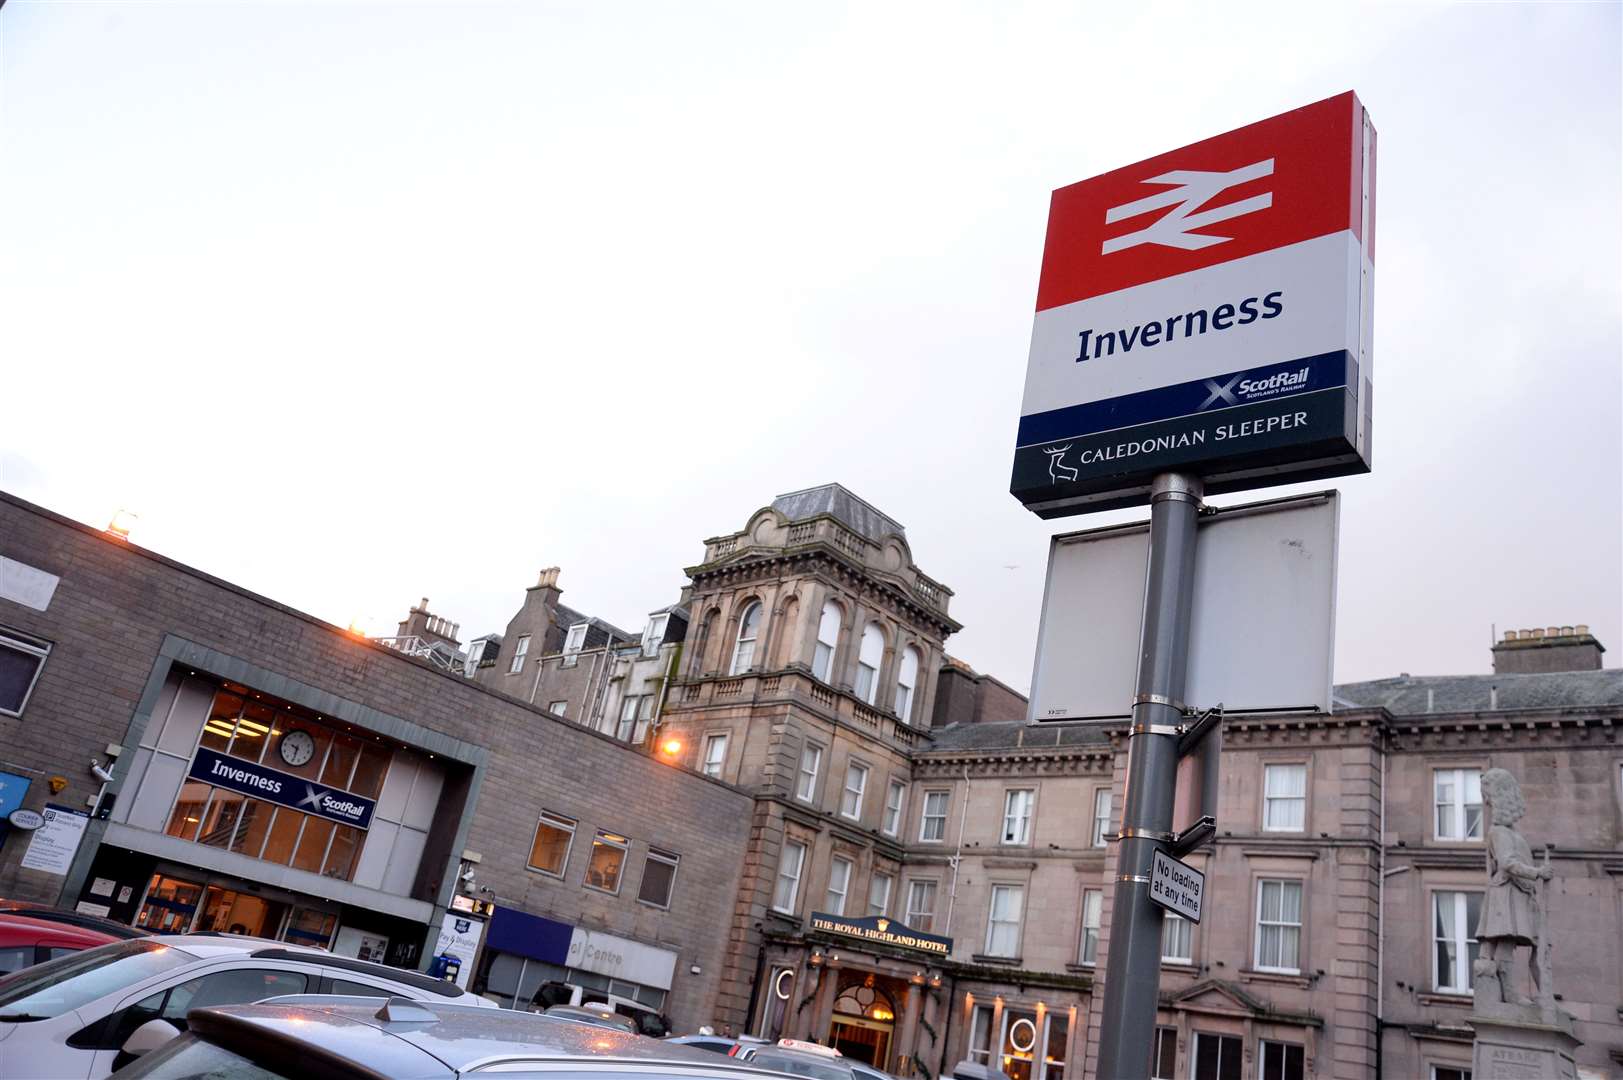 Fewer than 56 per cent of trains have arrived on time at Inverness for the last three years.